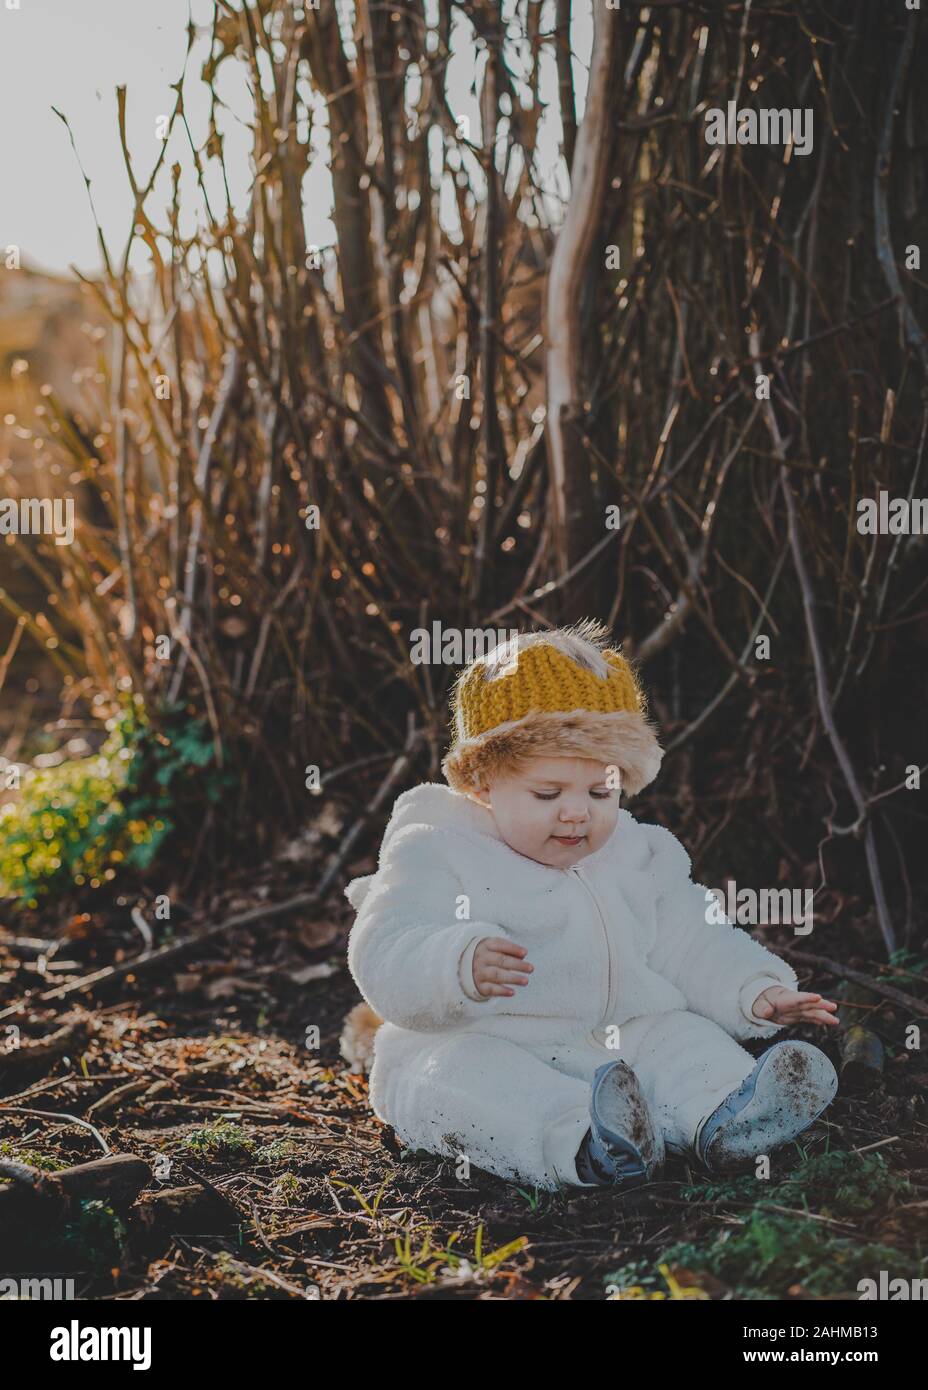 Little boy dressed as Max from Where The Wild Things Are in the woods Stock Photo